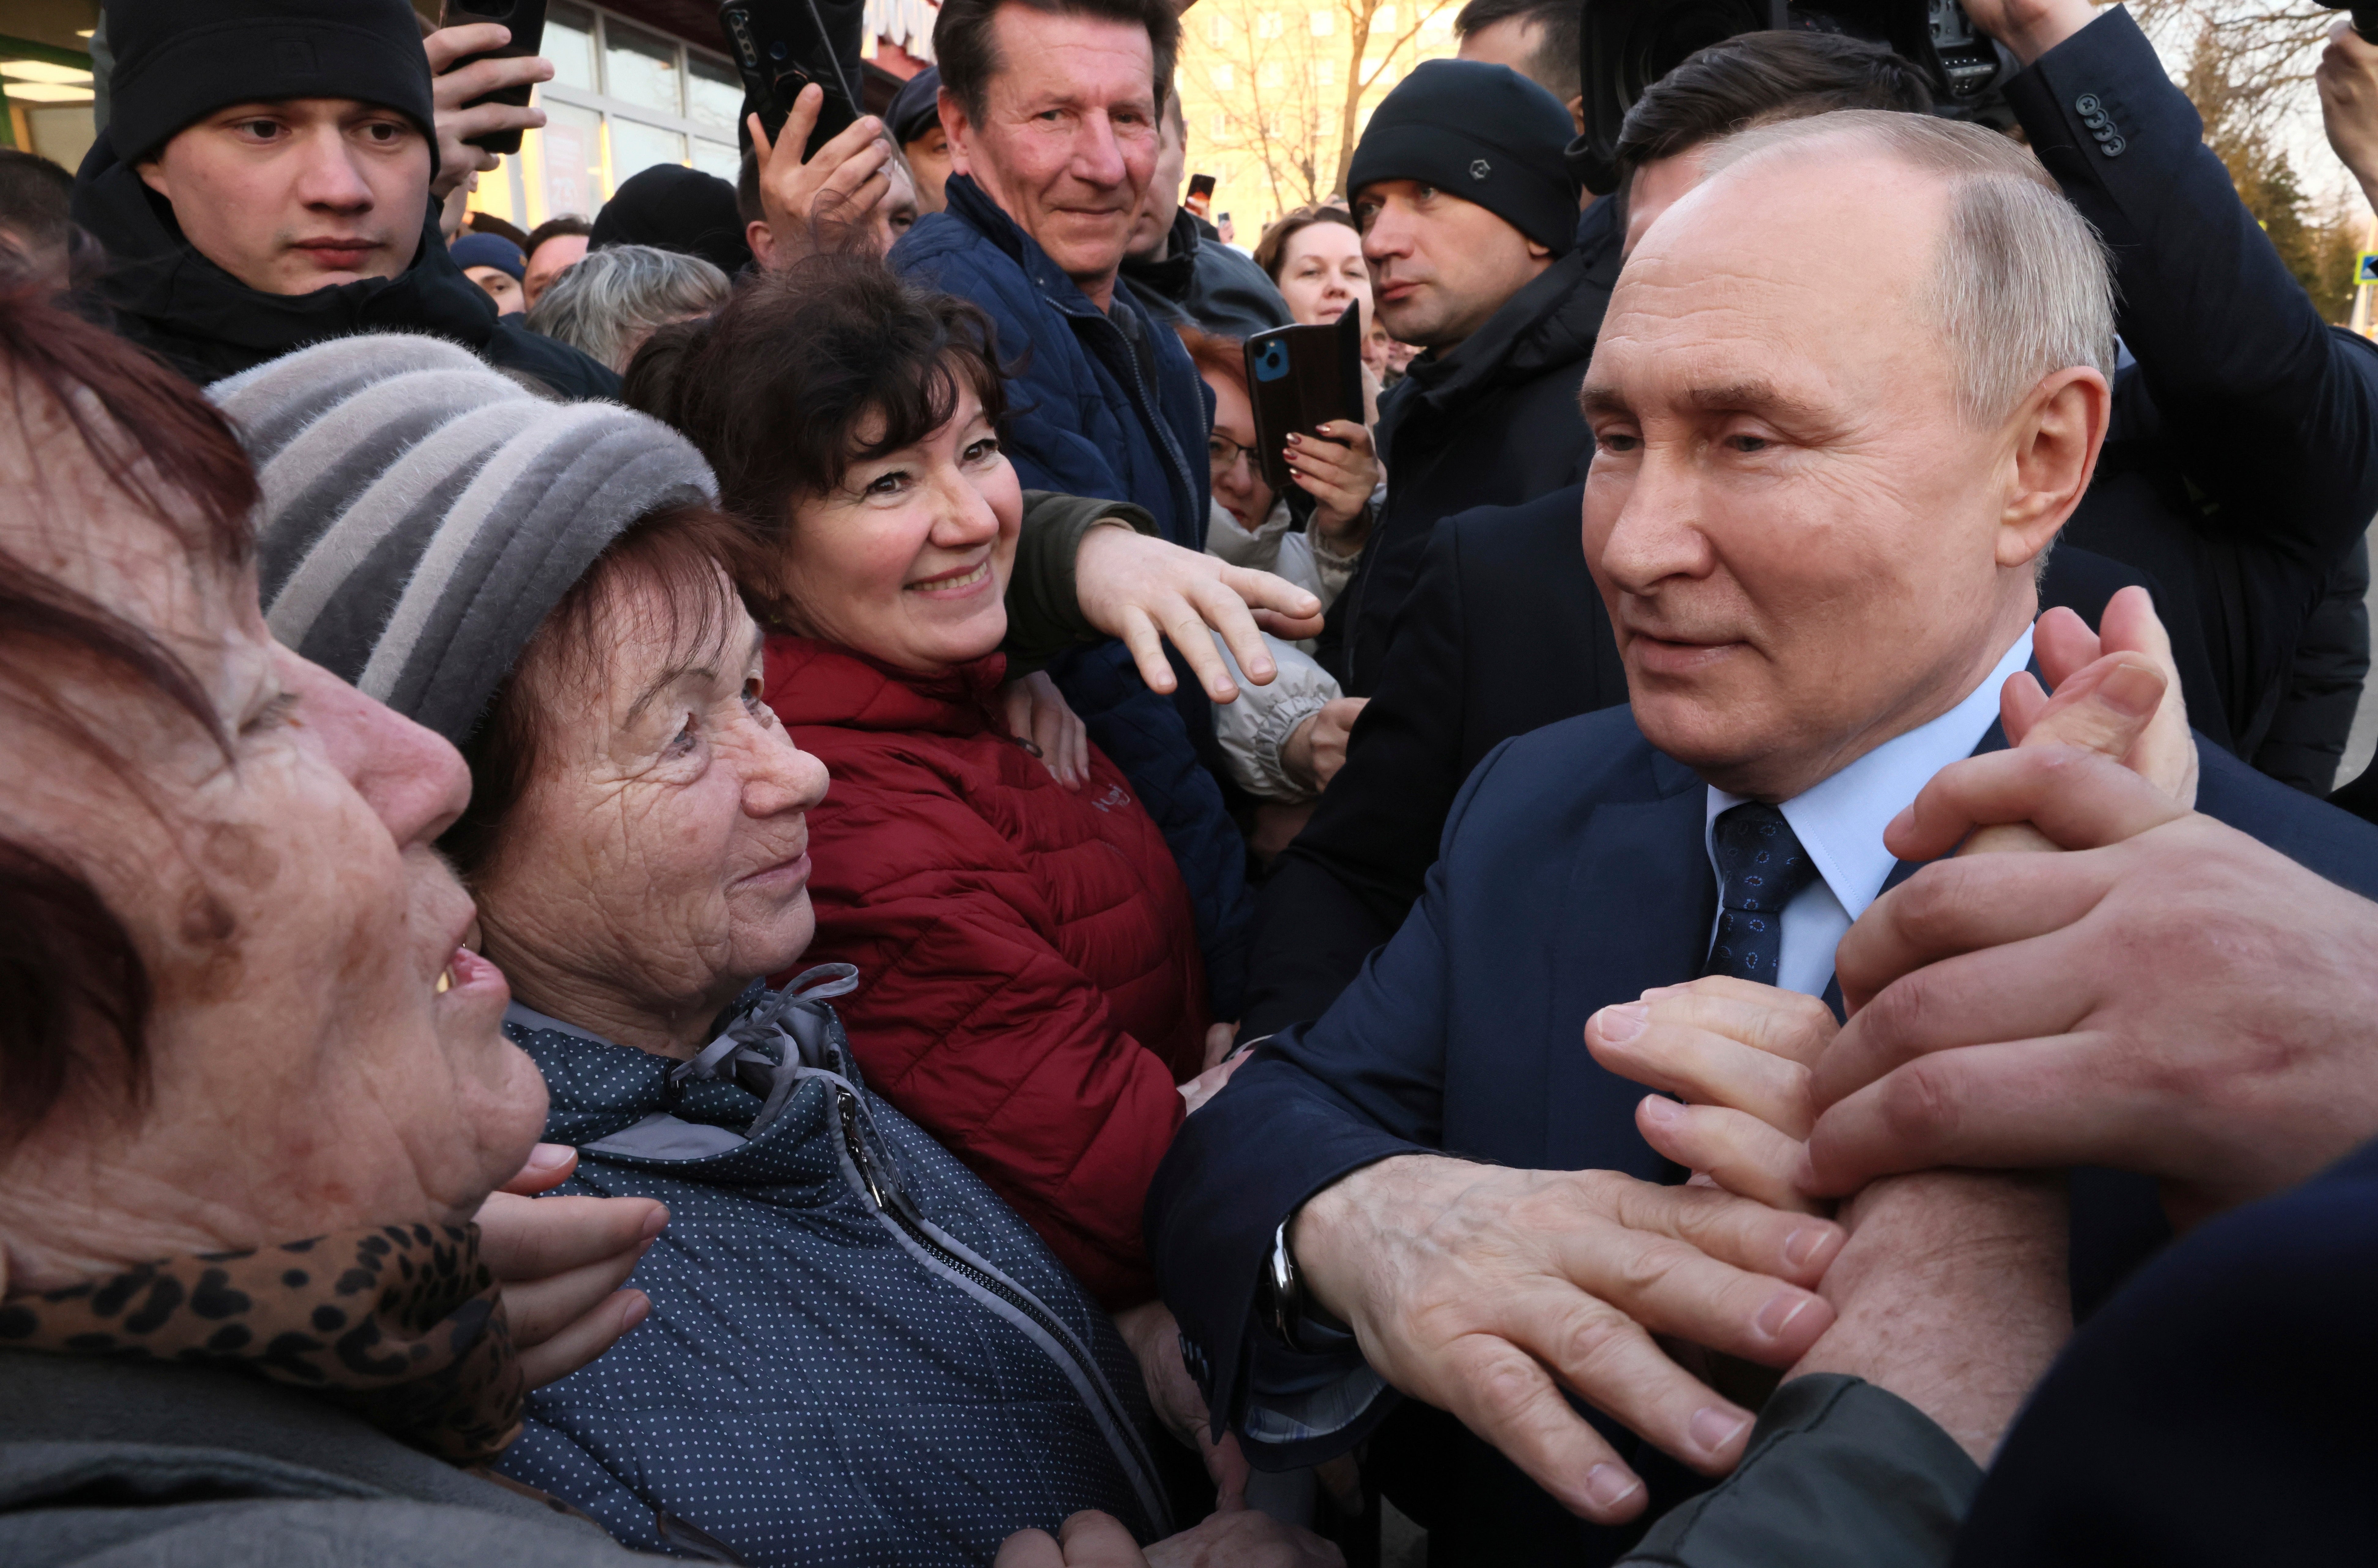 Russian president Vladimir Putin meets with residents following a visit to a greenhouse complex near Moscow ahead of elections this weekend